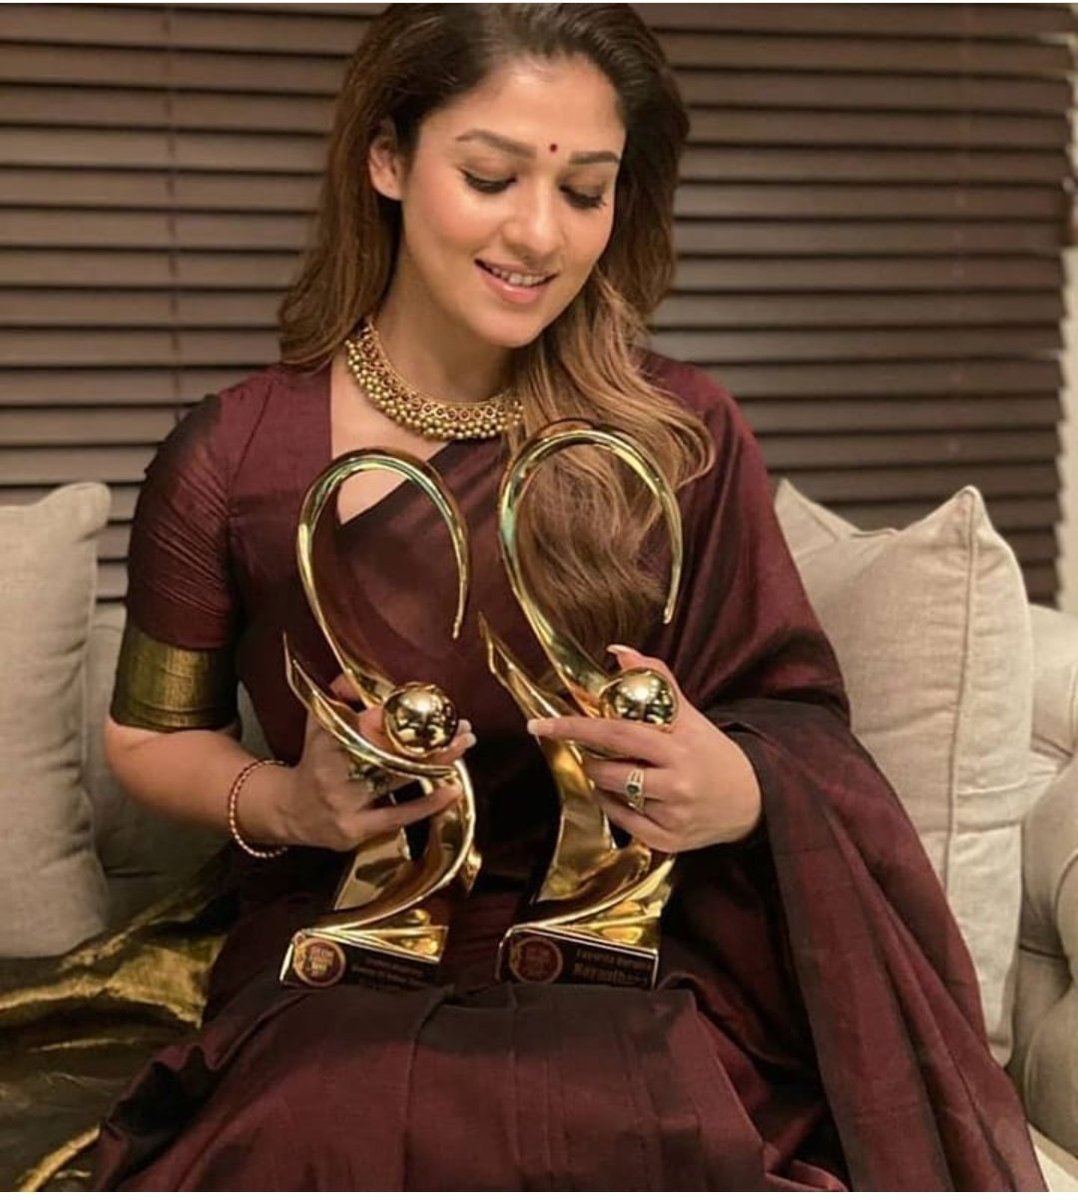 So here I go with some exciting saree pics of  #LadySuperstar.....But I don't get a satisfaction with just these tweets, coz she's got an OCEAN of SAREE GOALS IMAGES ! #Thalaivi  #Nayanthara  #ladysuperstarnayanthara  #MookuthiAmmanThanks  @v_mani1992 for nominating me !